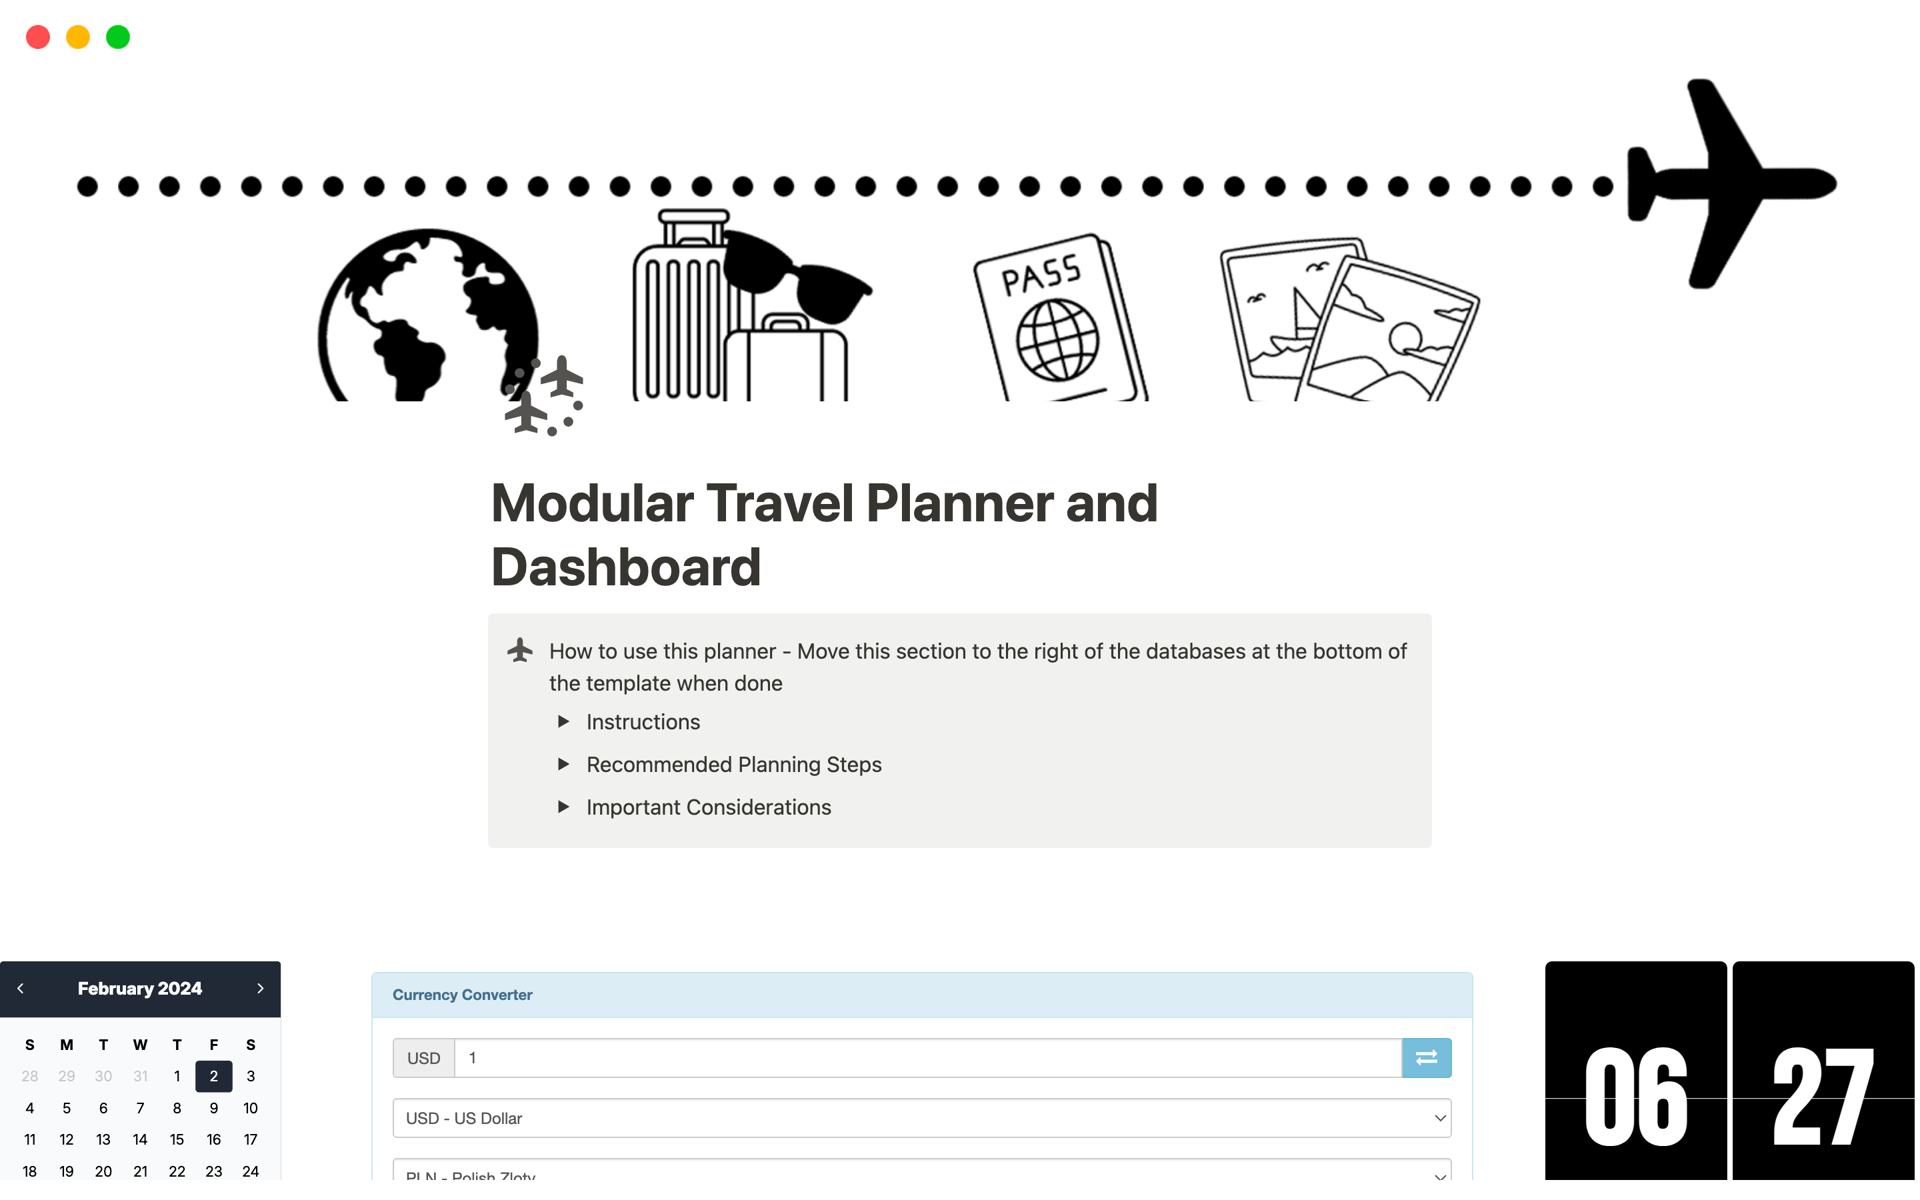 Simplifies travel planning using a modular approach. Features drag and drop interface, cost analysis table, calendar view, packing list, and notes. Includes modular card templates for activities, lodging, and transportation with fields for critical information.